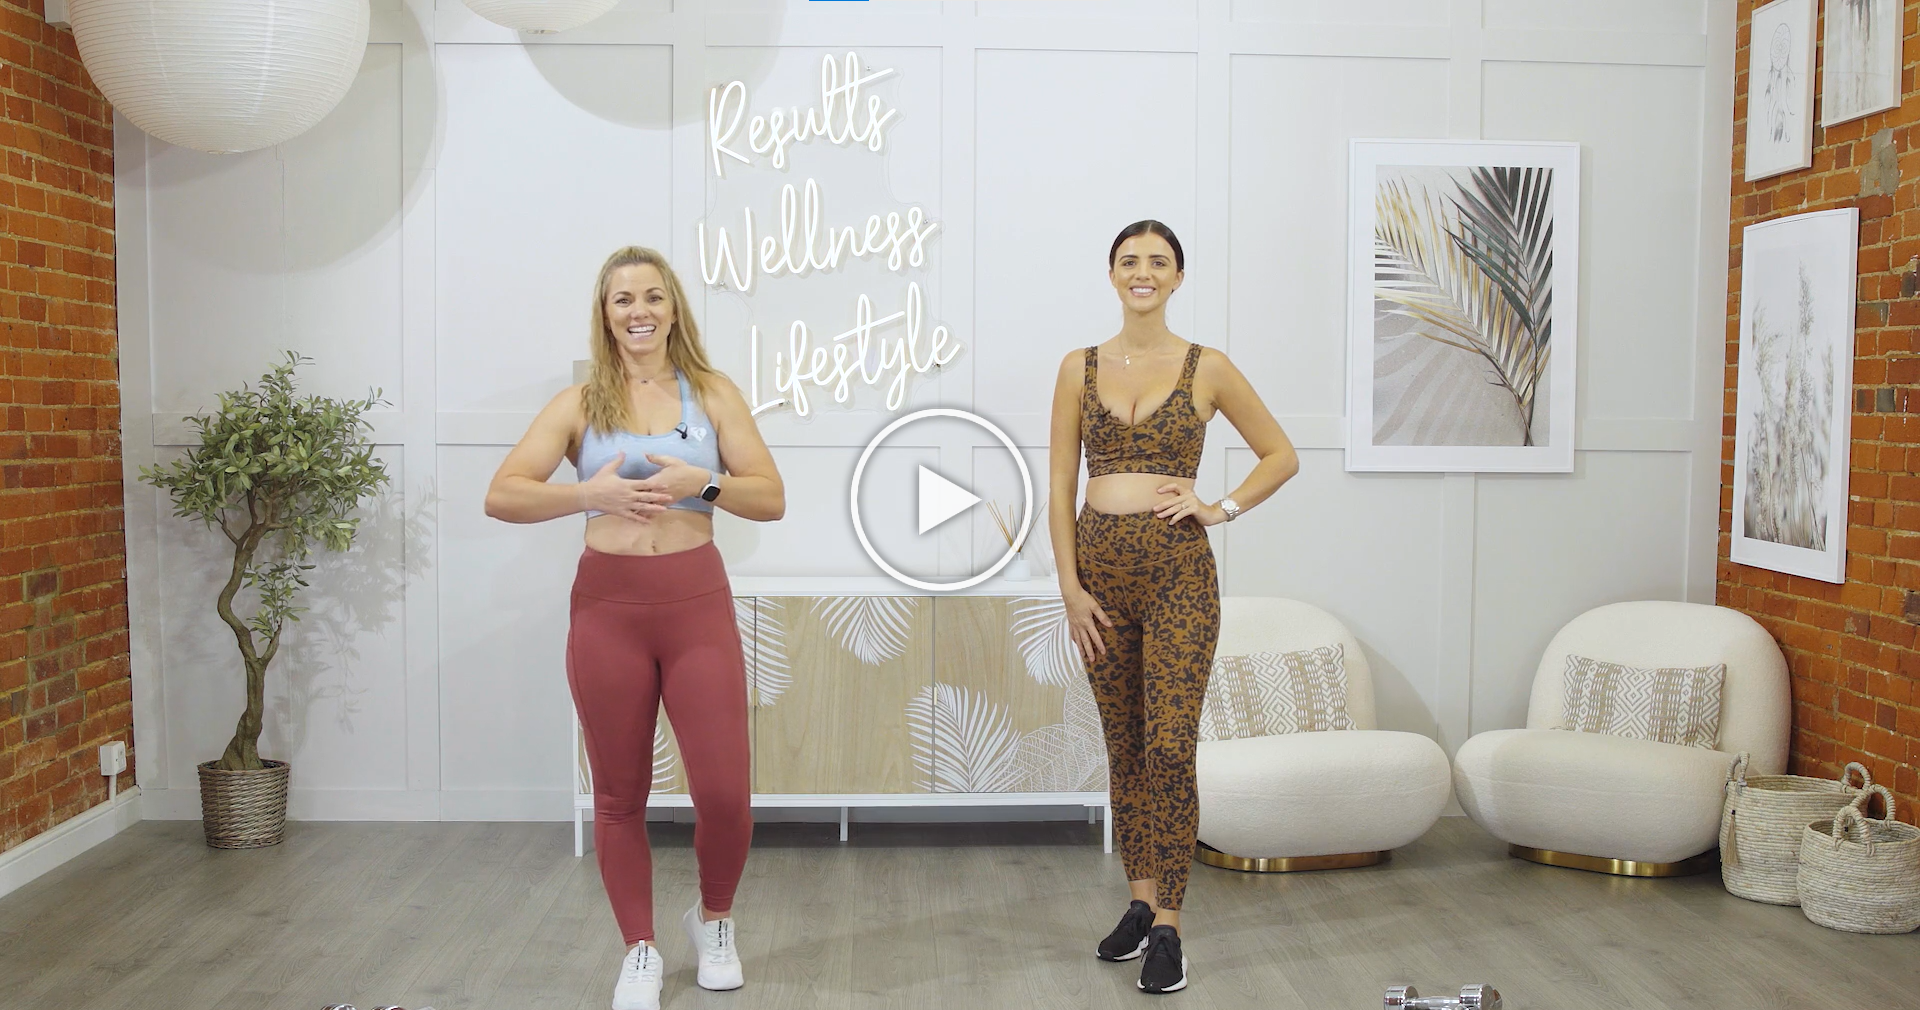 RWL - at home fitness